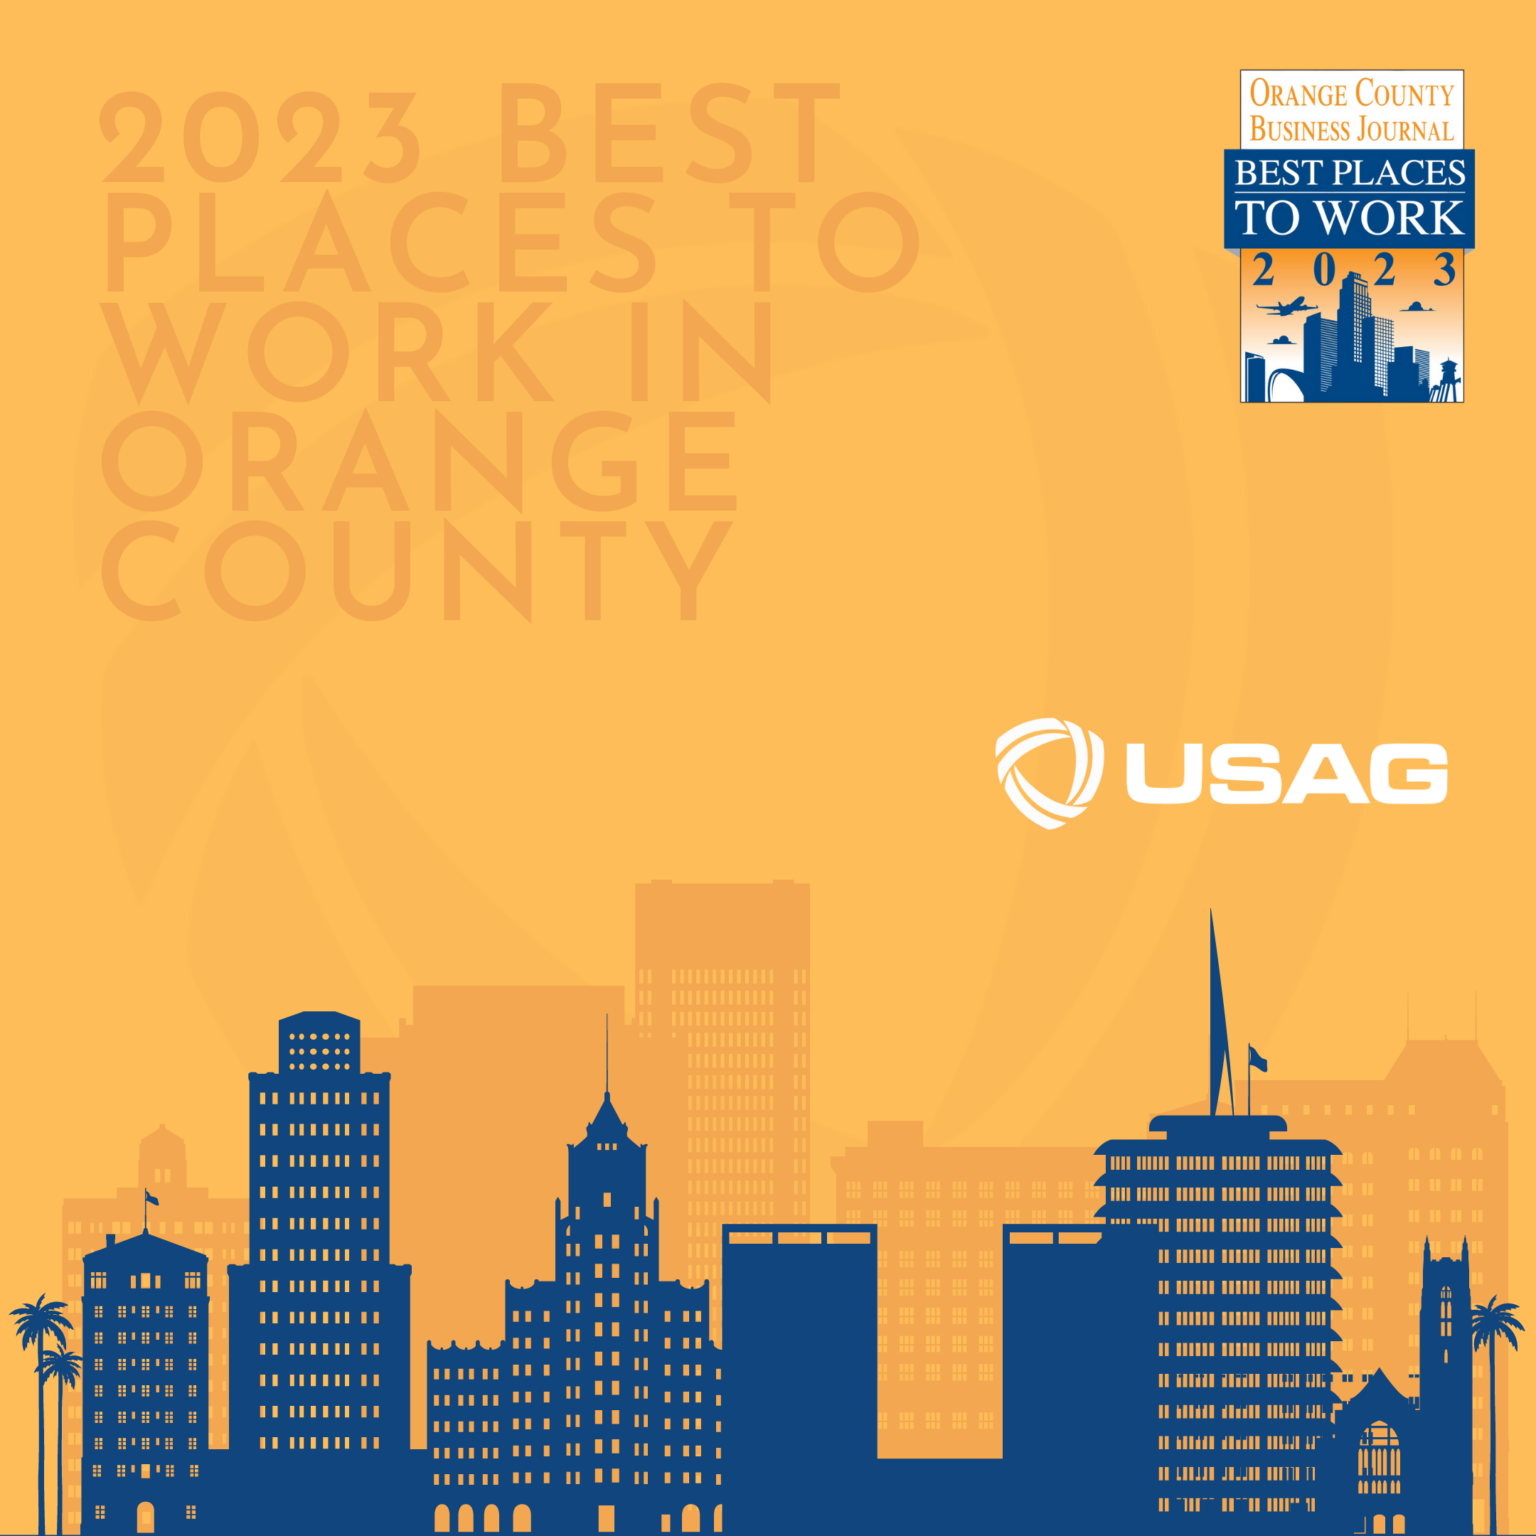 US Alliance Group Secures A Top Spot In Orange County Business Journal’s Best Place to Work in 2023